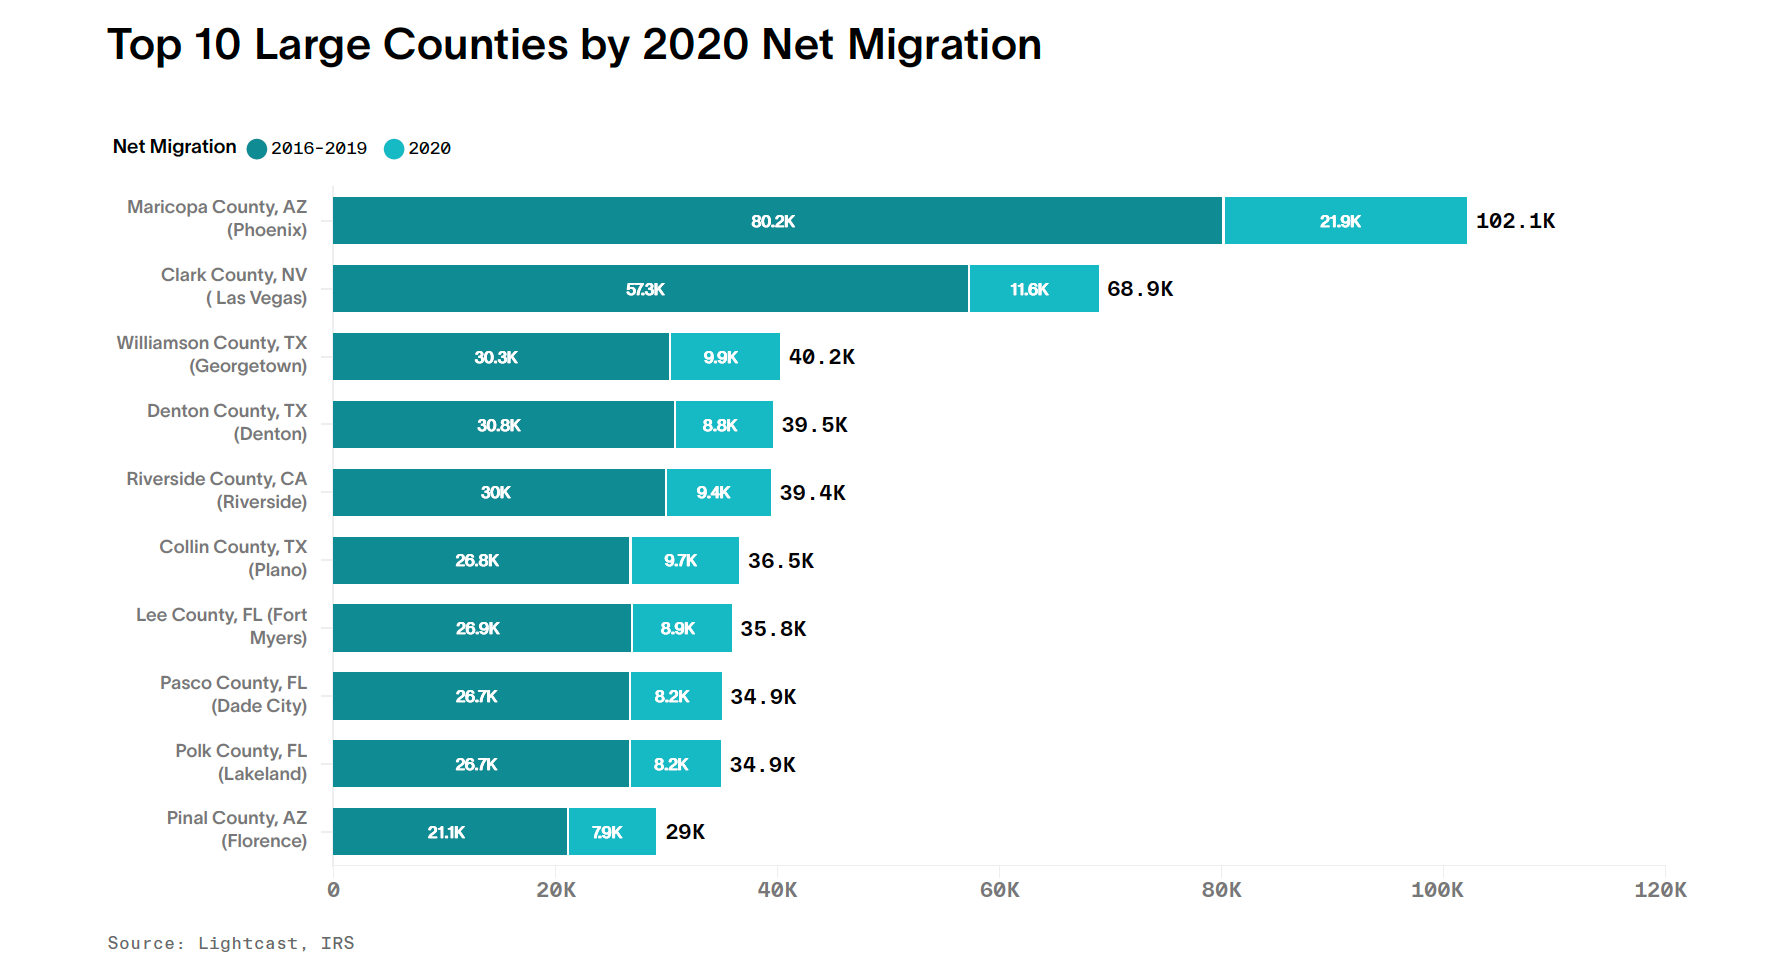 chart showing top 10 large counties by 2020 net migration (maricopa county, AZ, has a dominant lead)